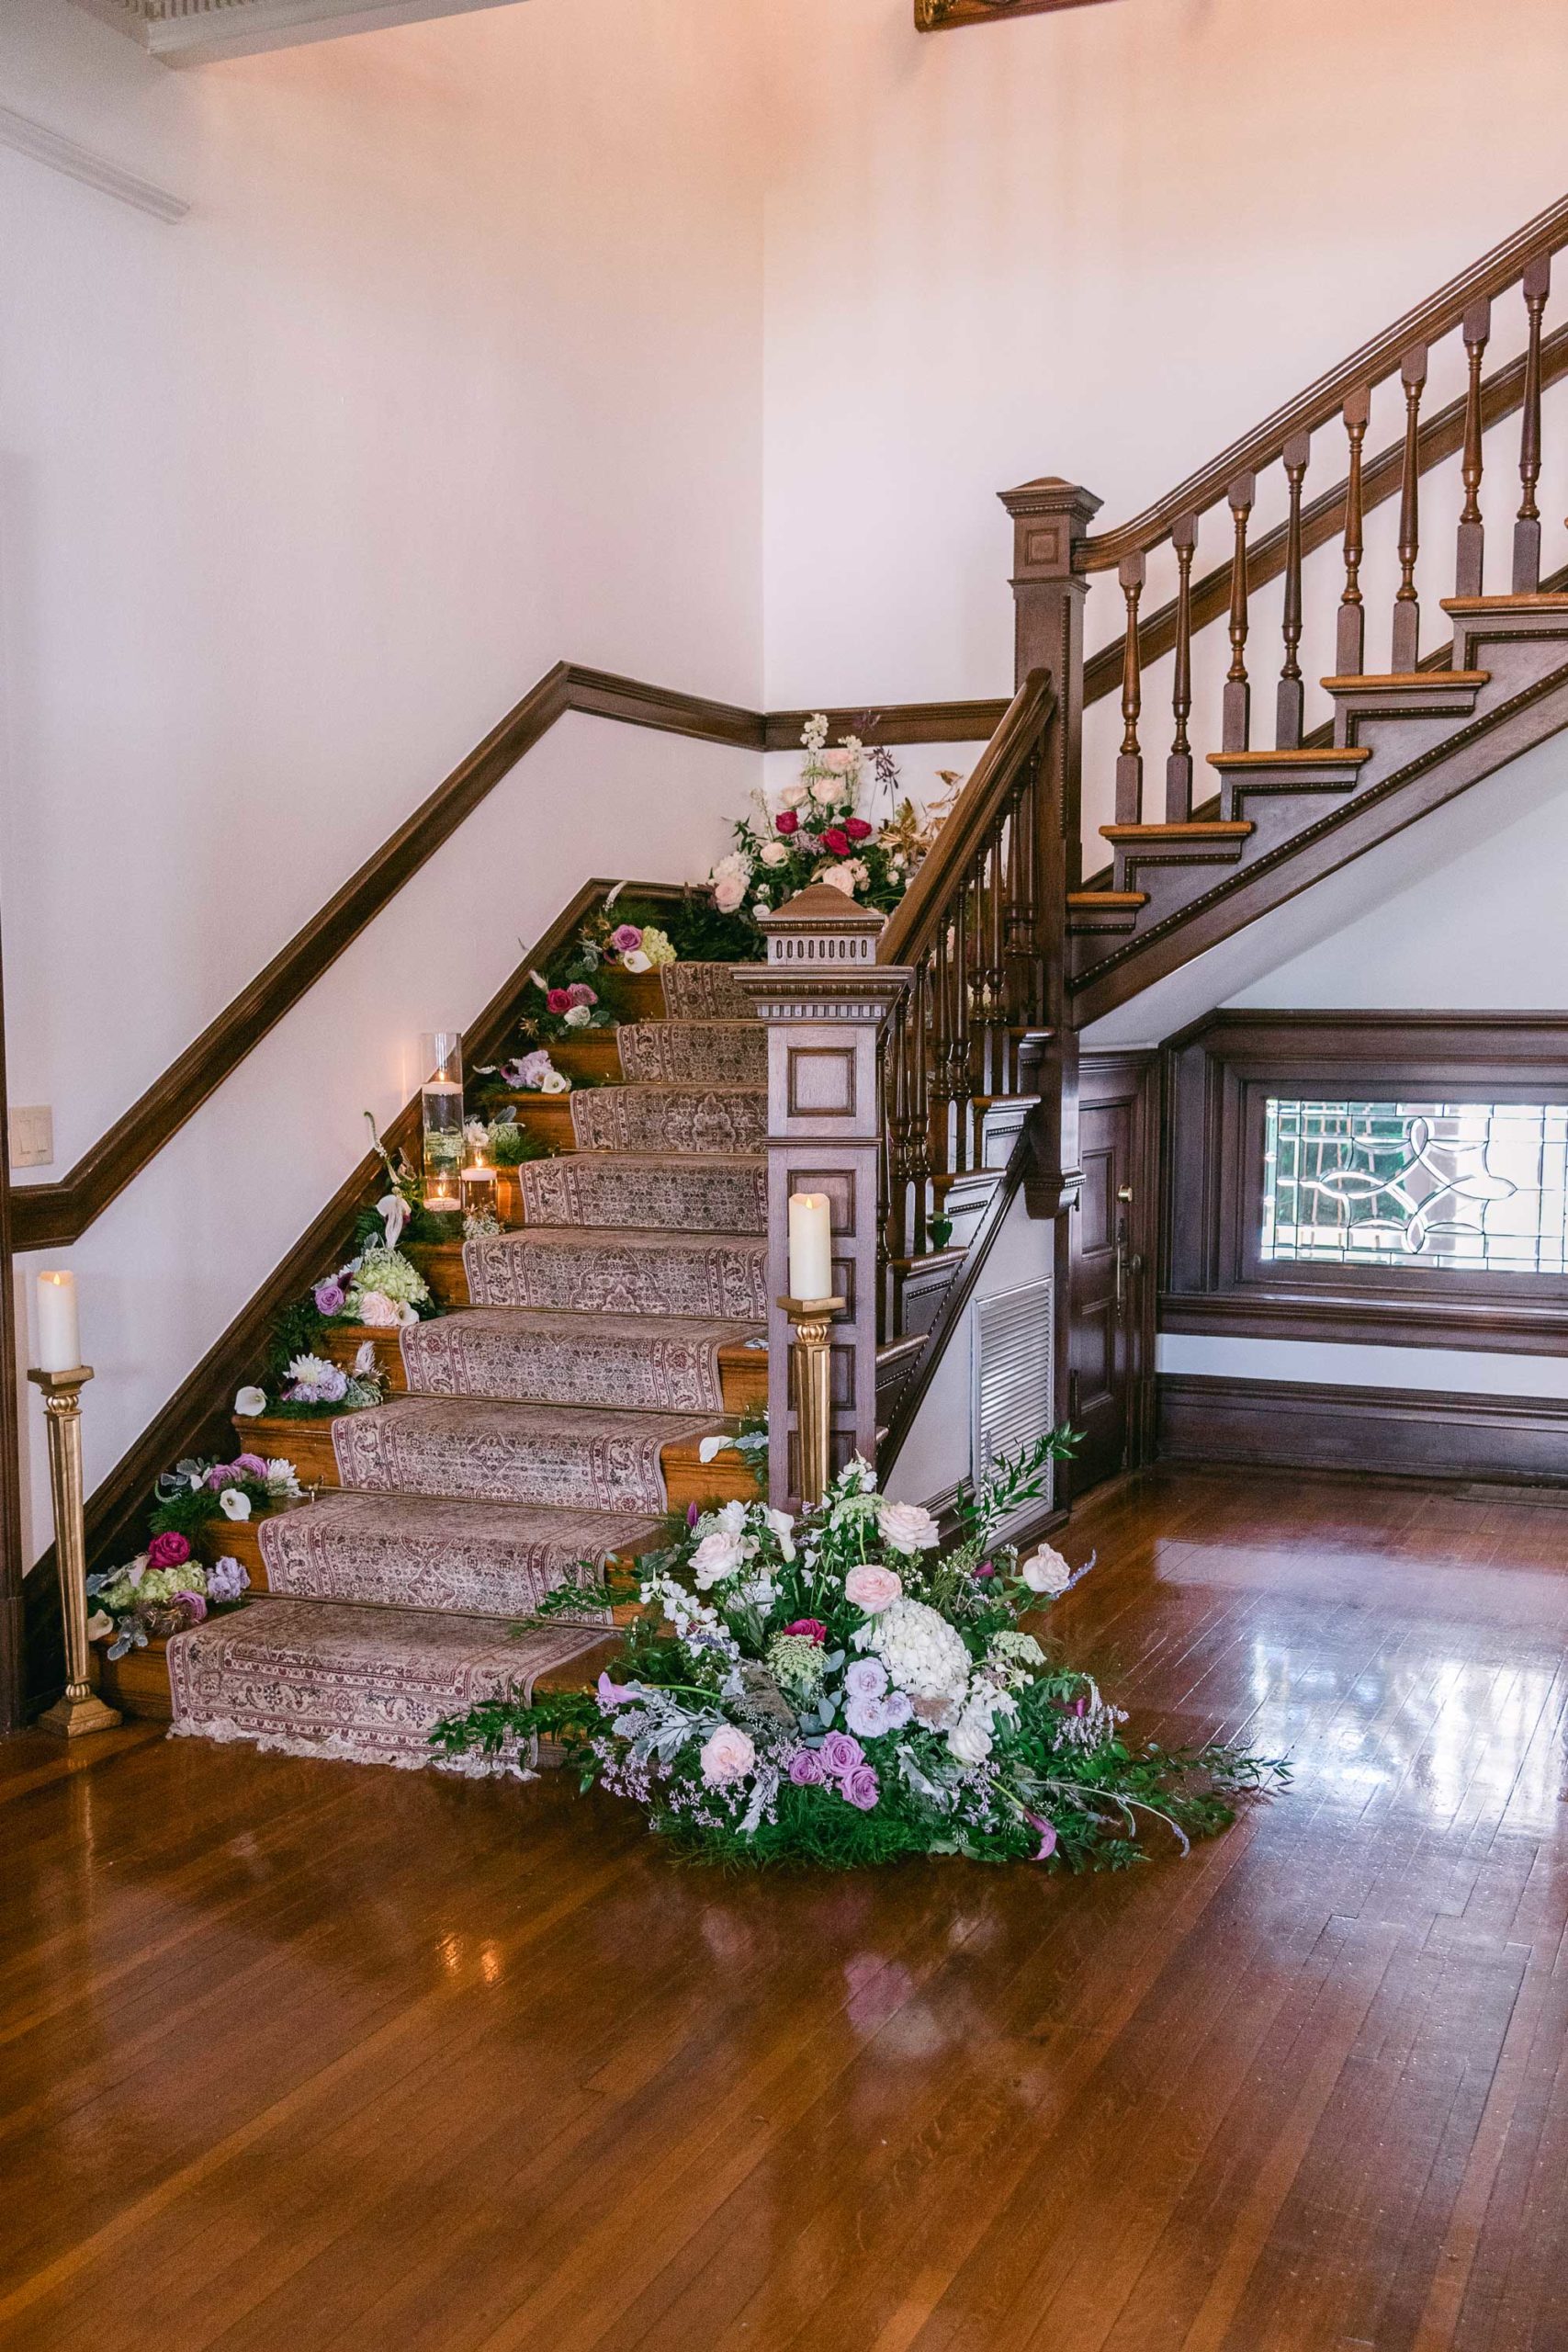 Decorated staircase with beige carpet